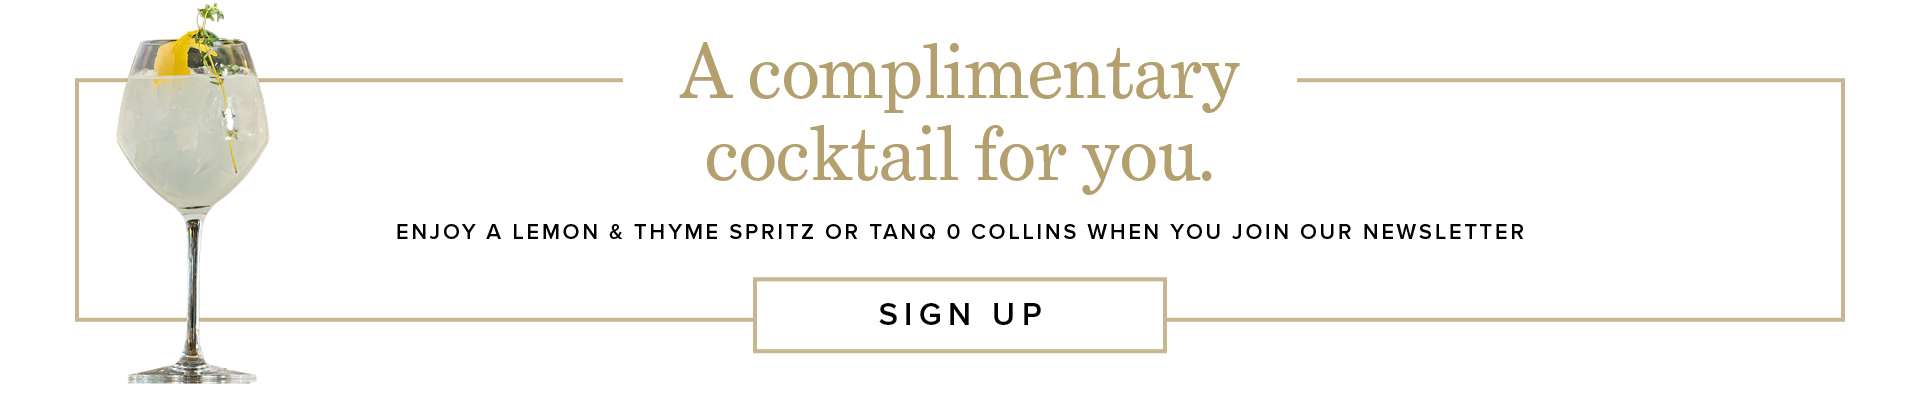 Sign up today for a complimentary cocktail